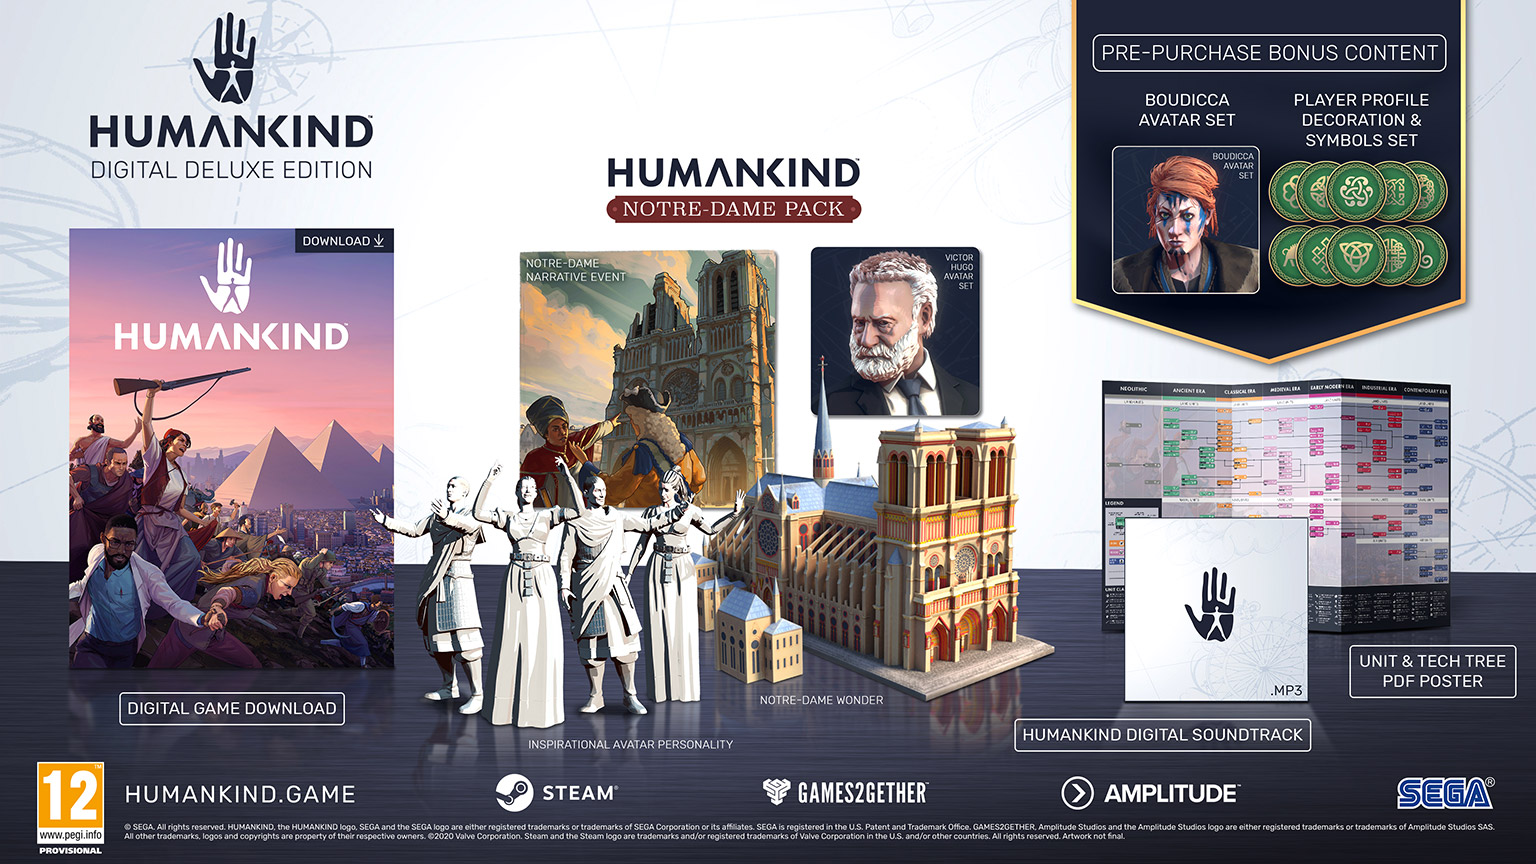 Humankind Digital Deluxe Edition